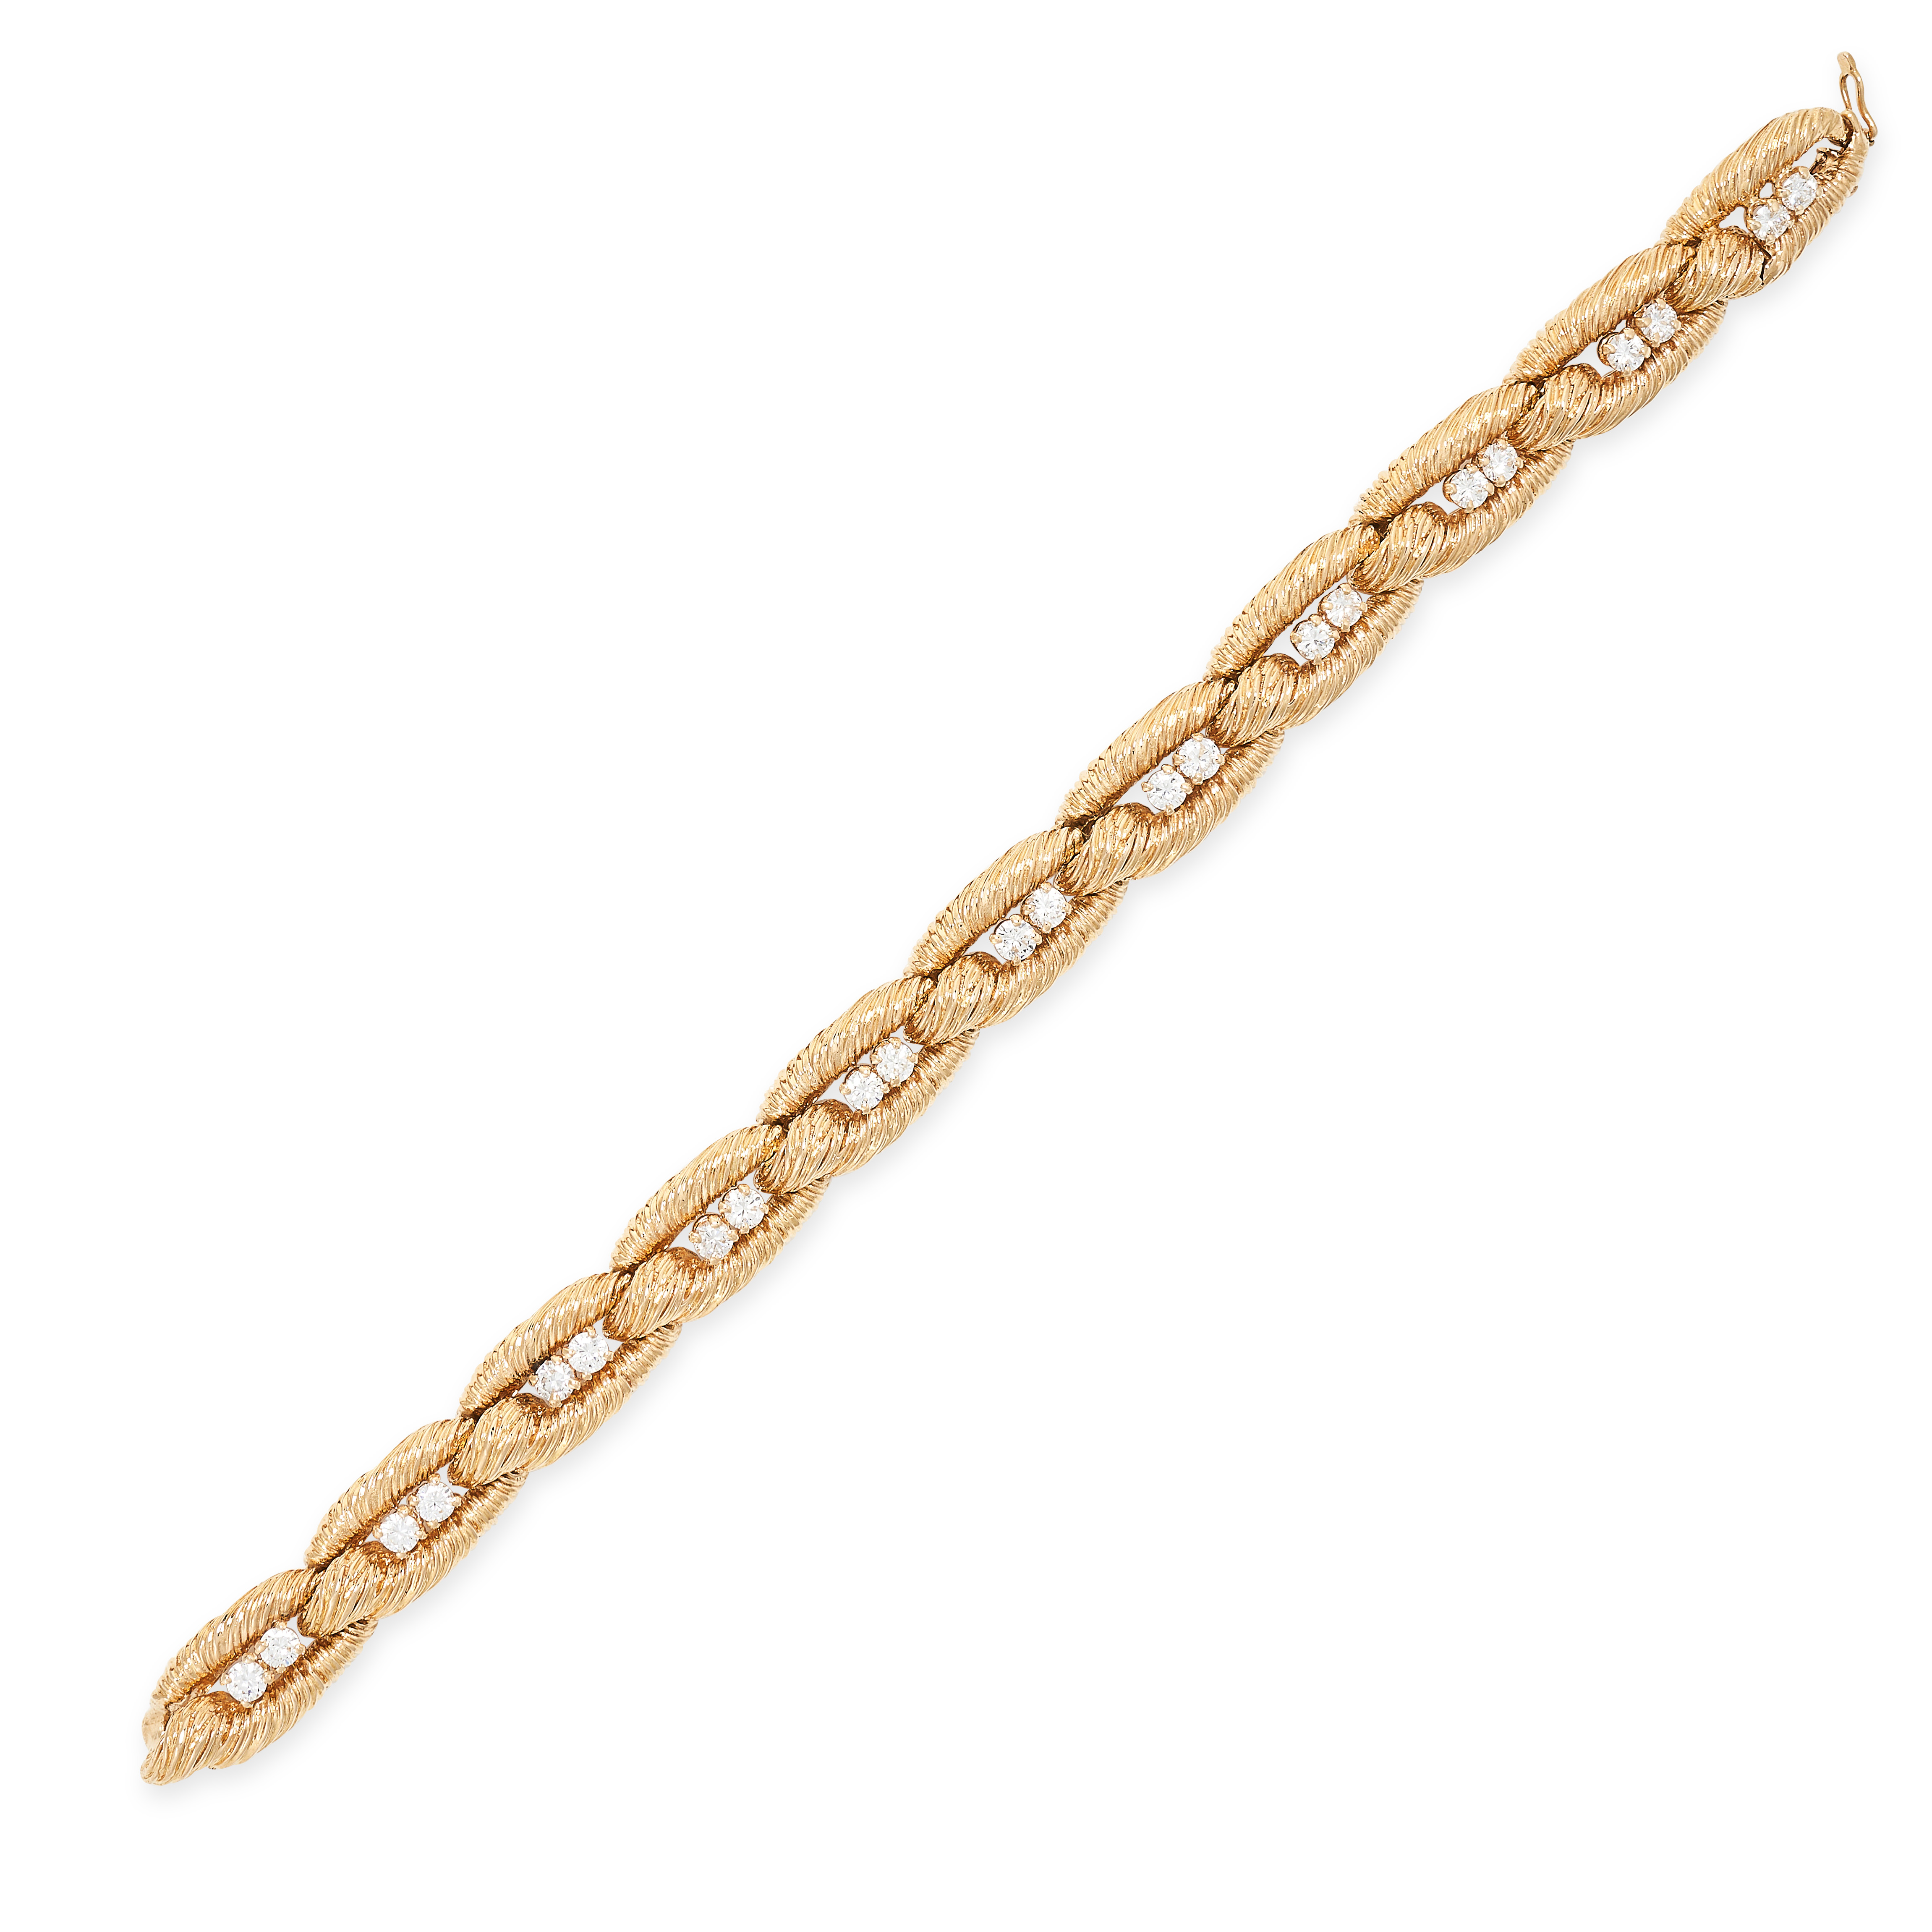 CARTIER, A VINTAGE DIAMOND BRACELET in 18ct yellow gold, the textured links set with pairs of - Image 2 of 2